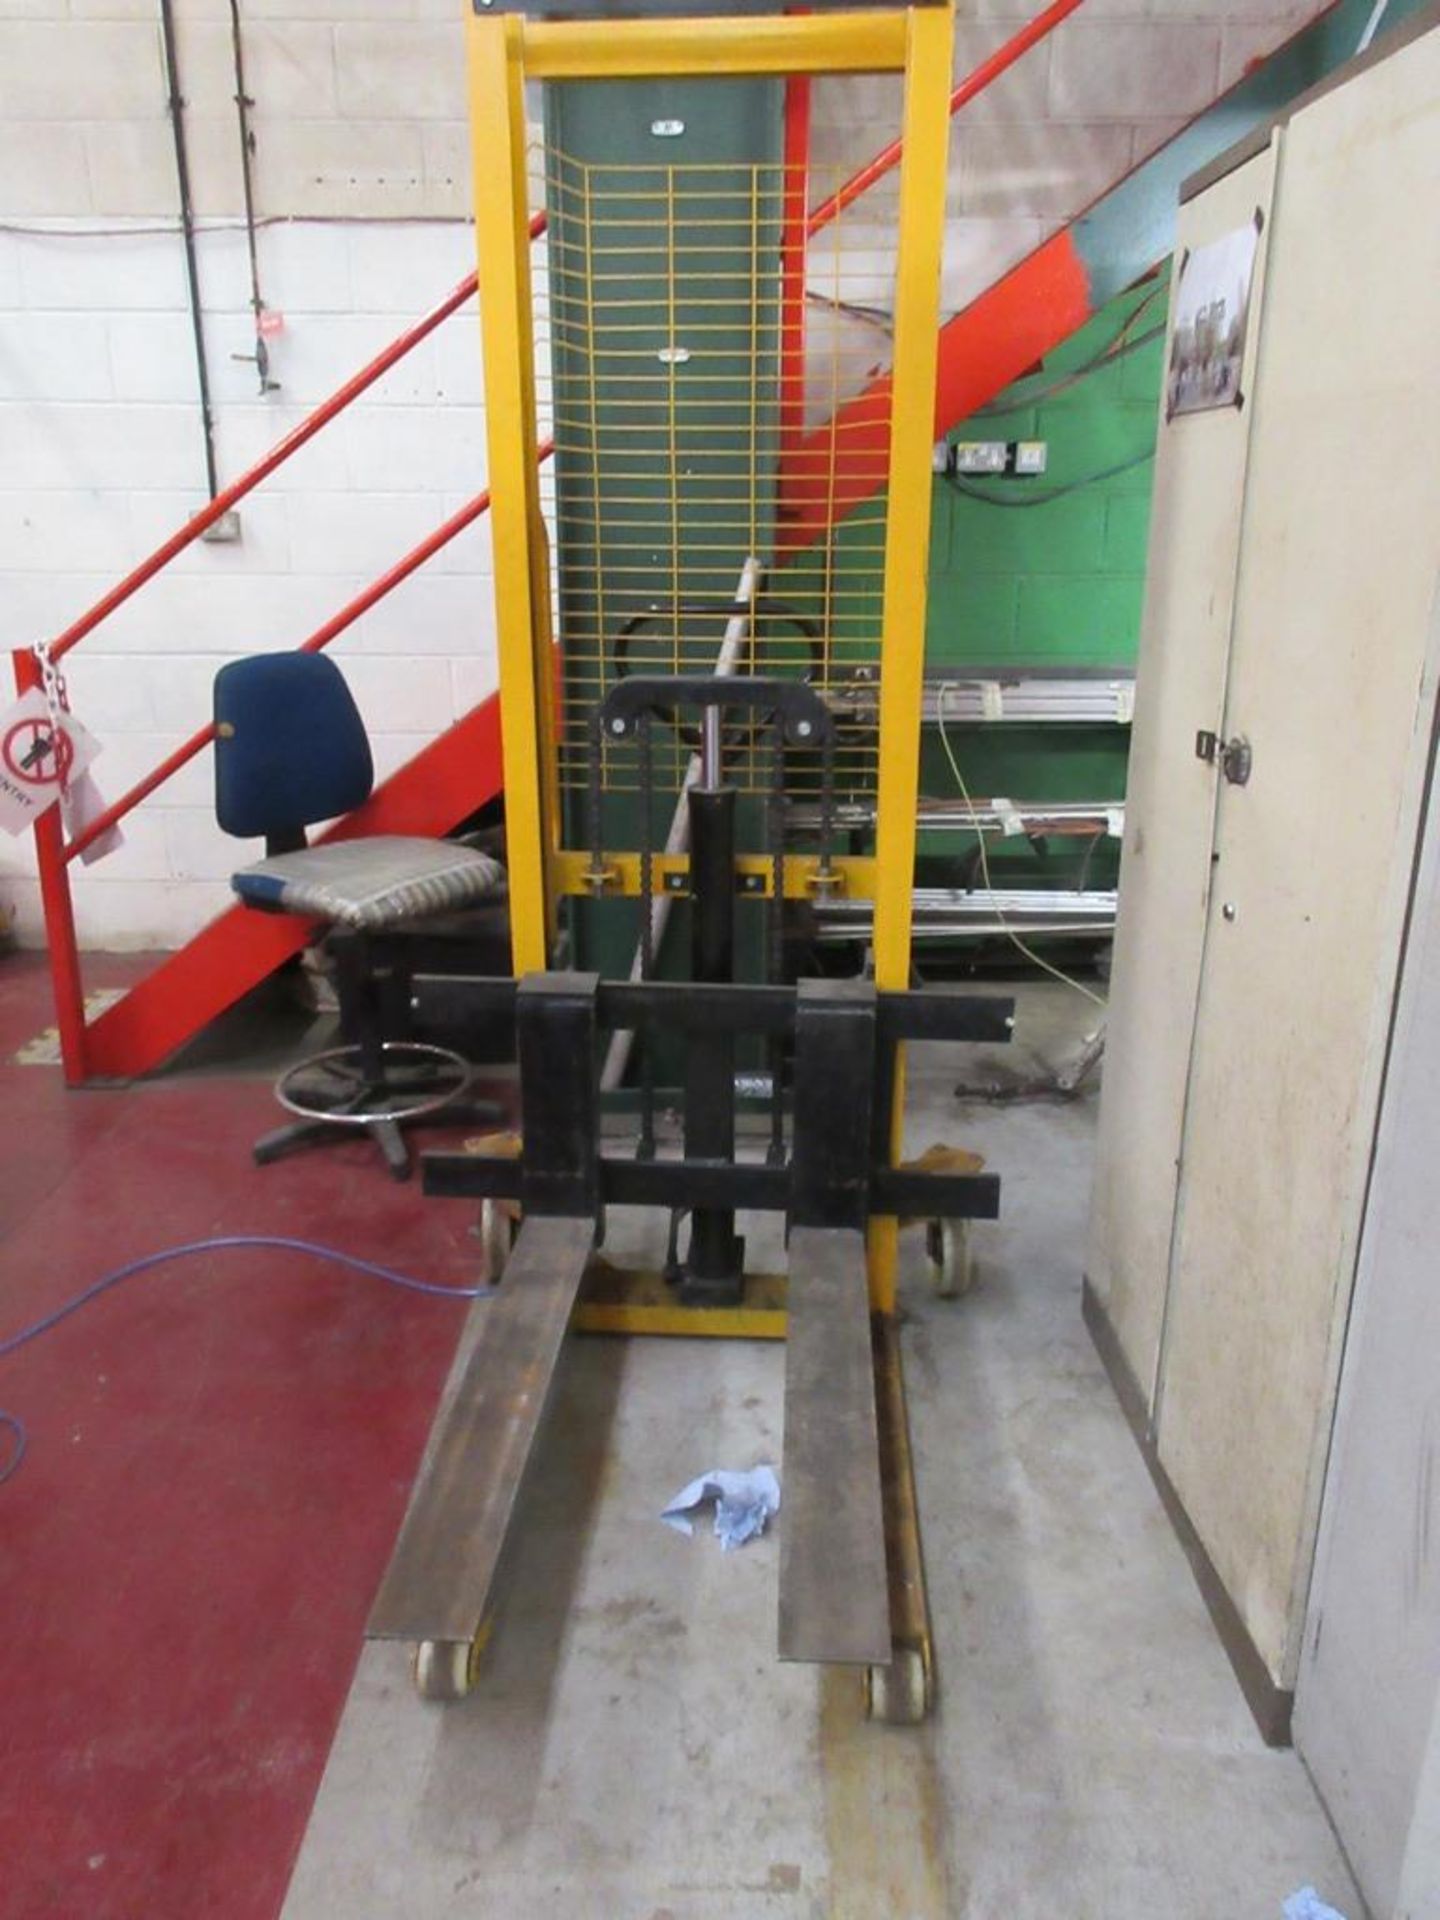 Chaoneng SHT-IT mobile pedestrian stacker lift NB: This item has no record of Thorough